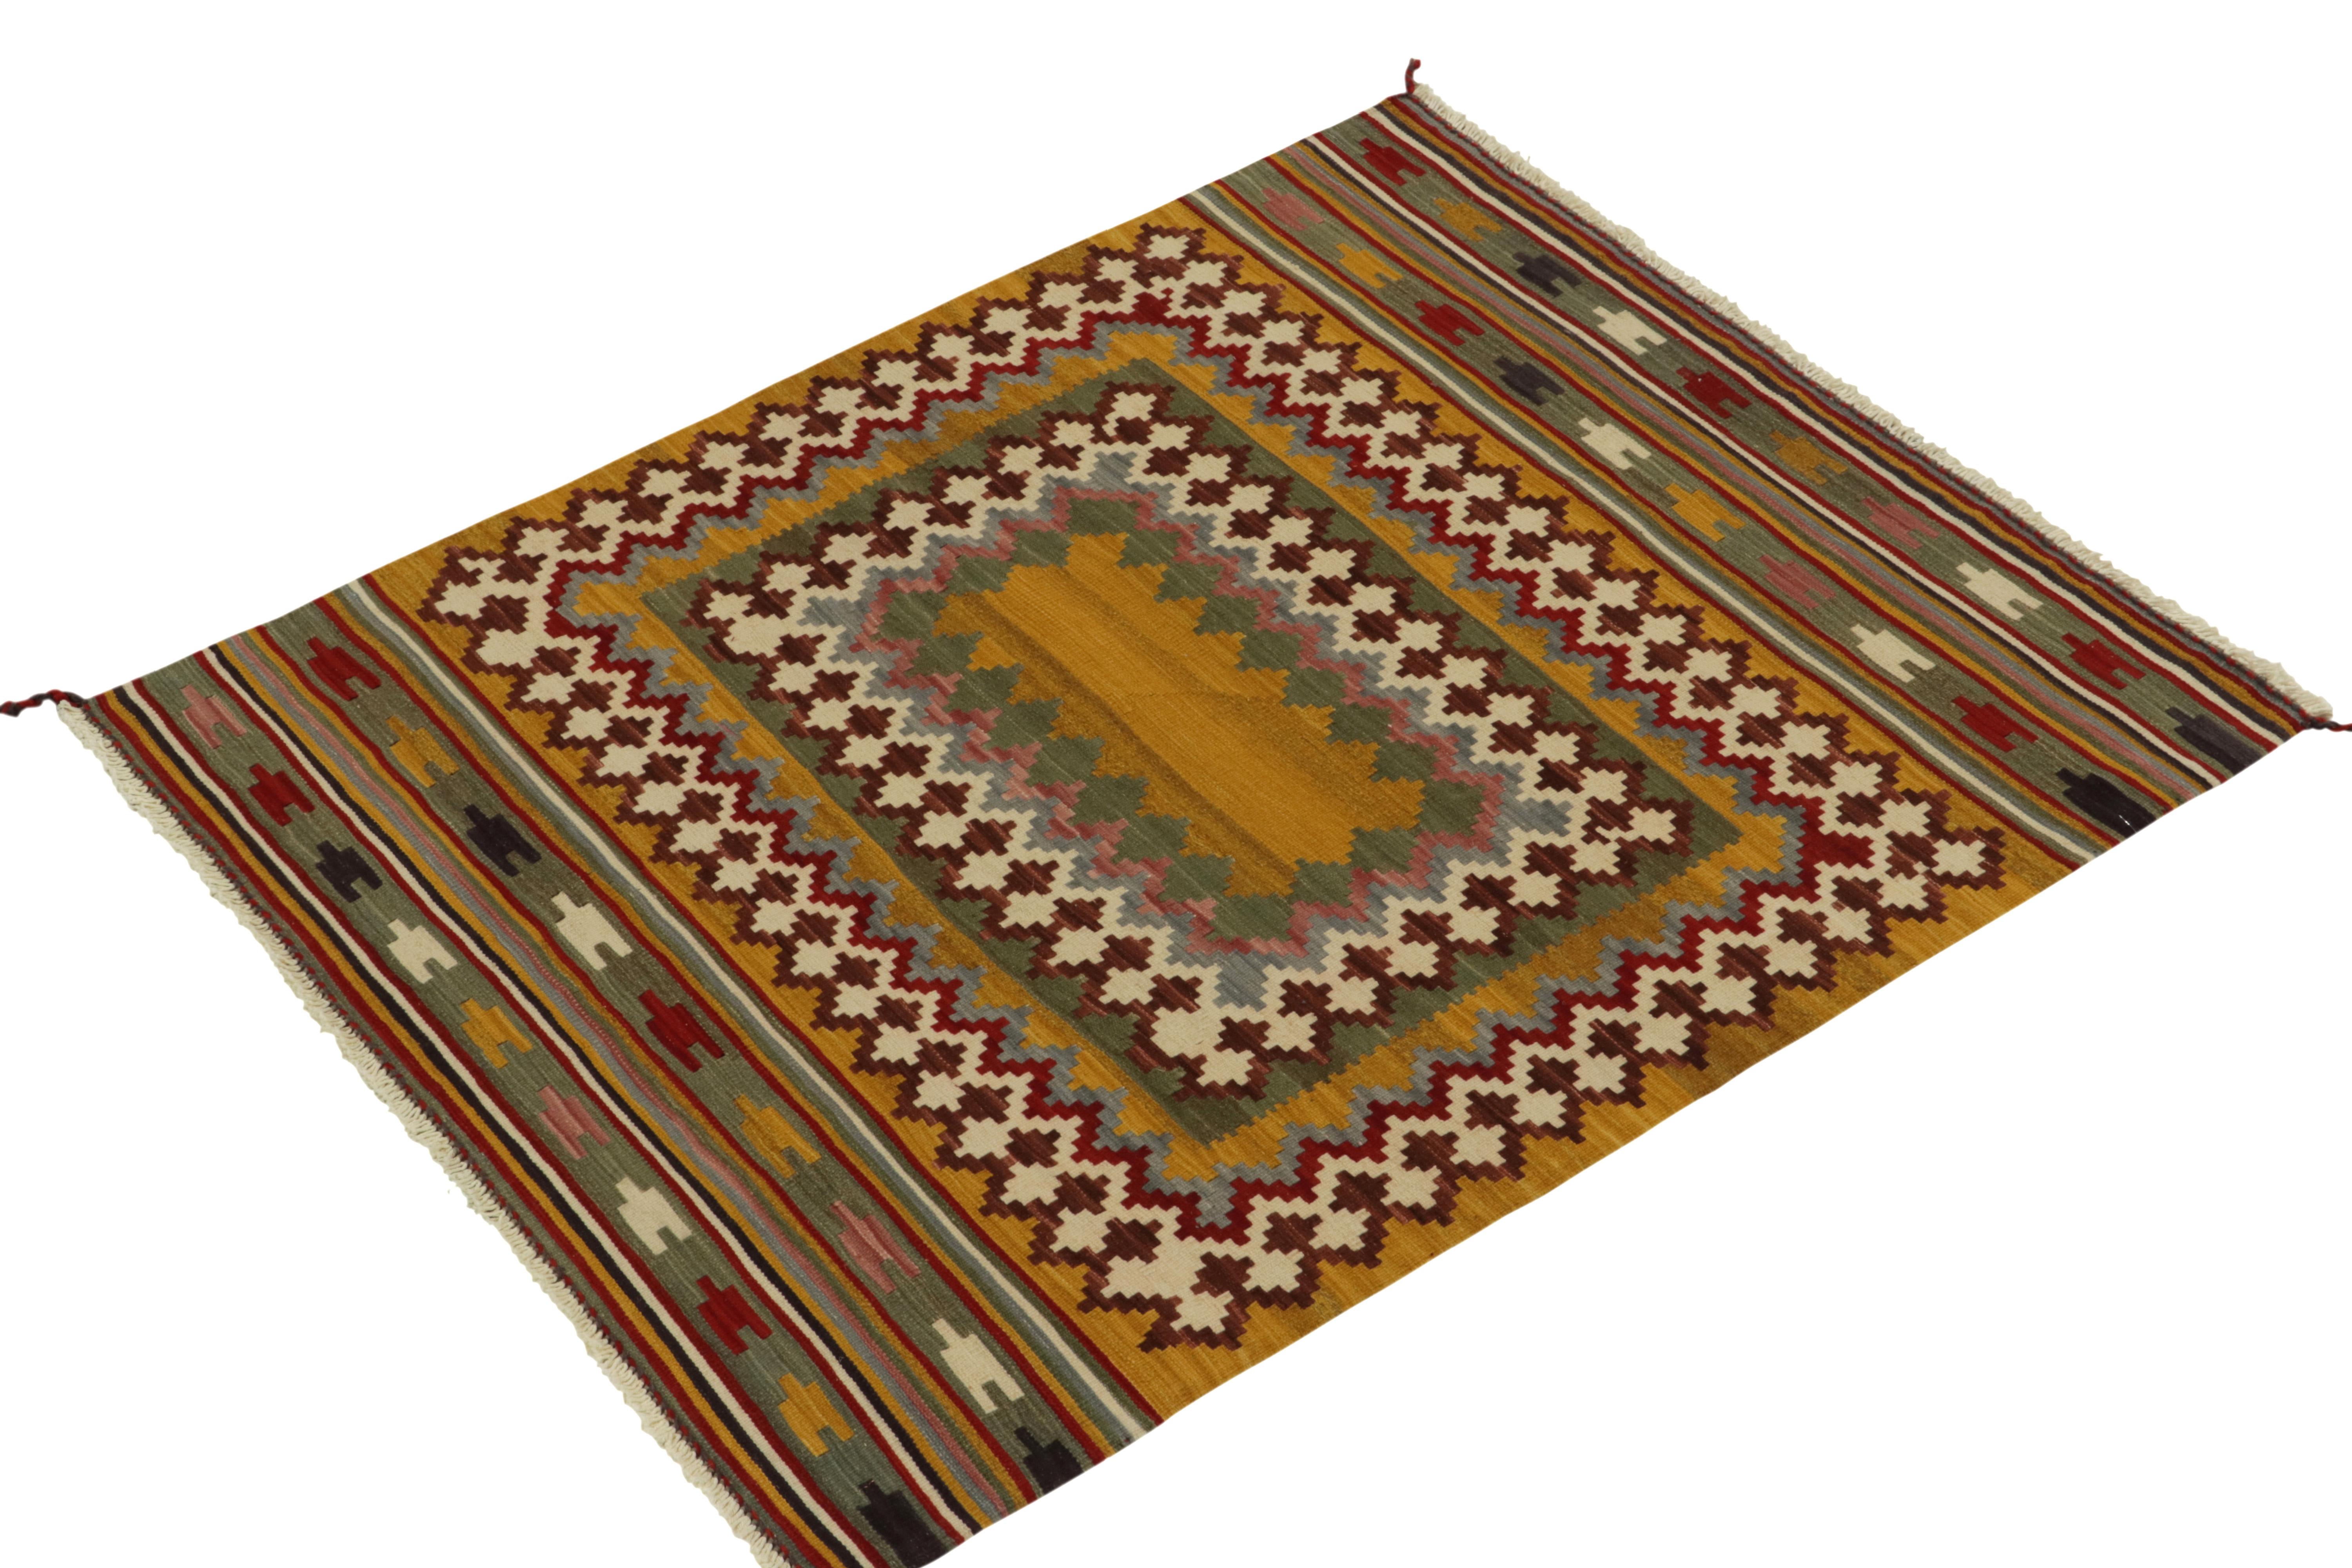 Persian 1980s Vintage Sofreh Kilim Rug in Gold, Green Tribal Pattern by Rug & Kilim For Sale